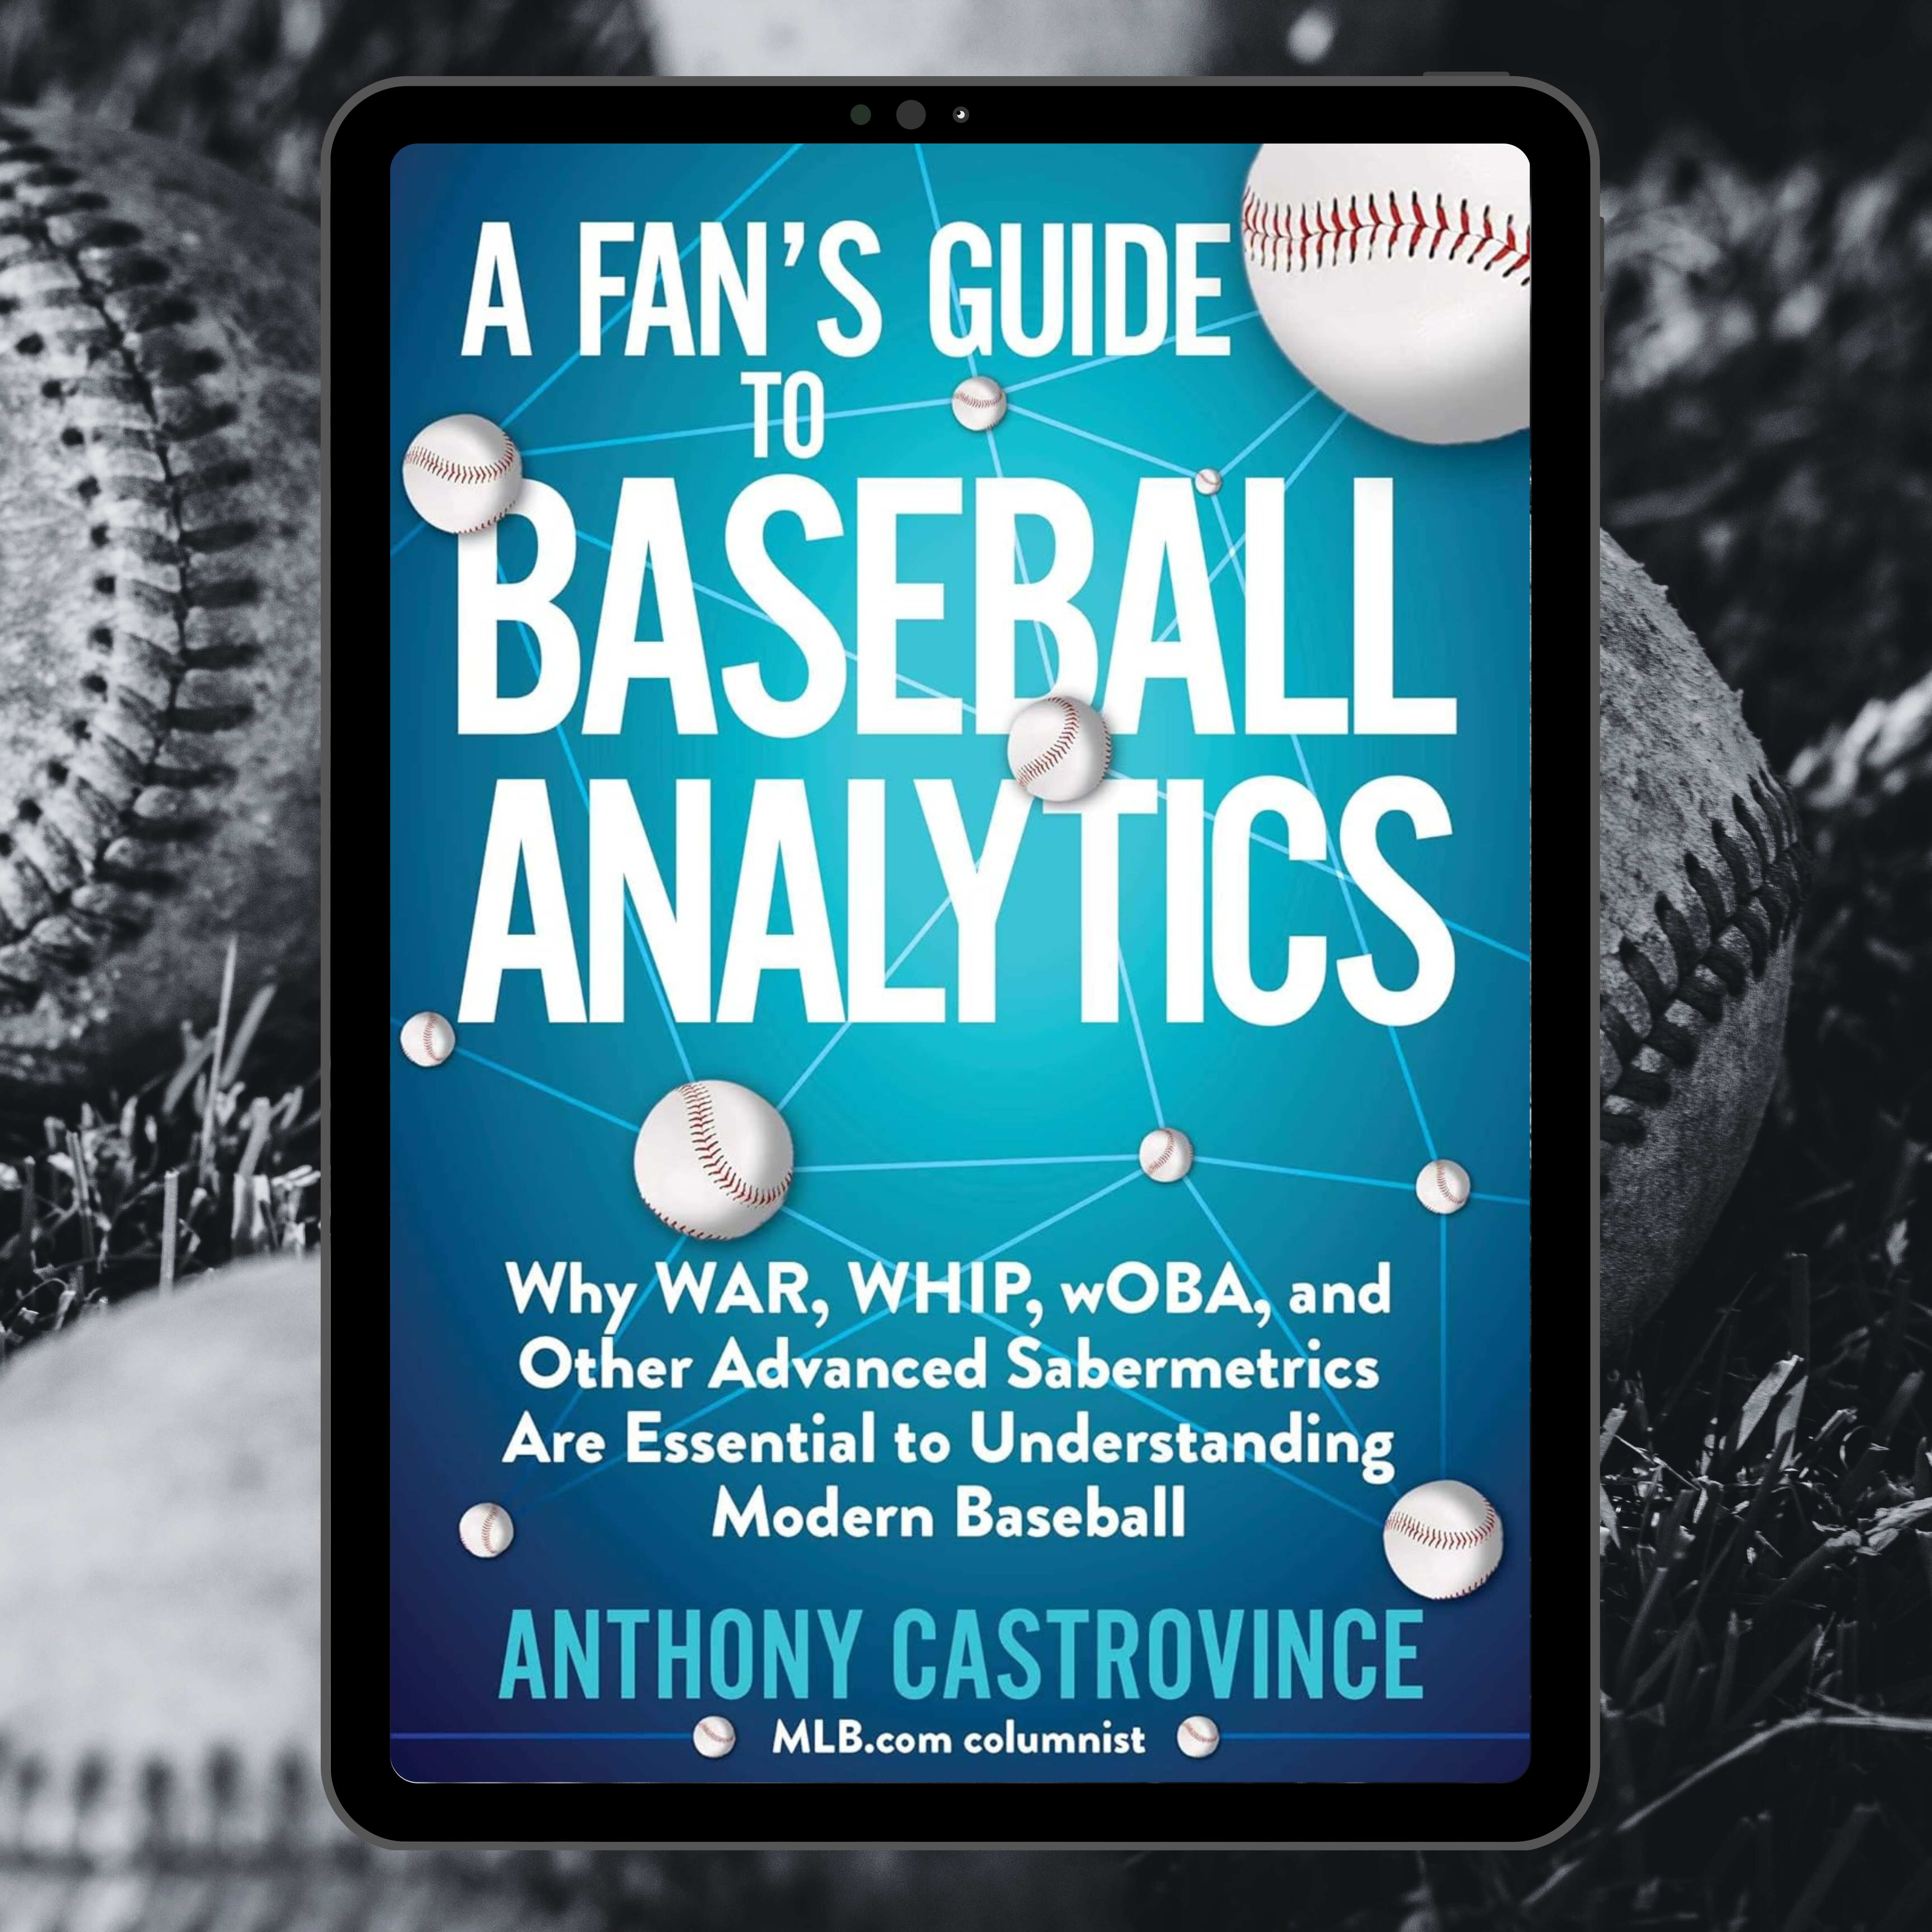 Fan’s Guide to Baseball Analytics. By Anthony Castrovince.